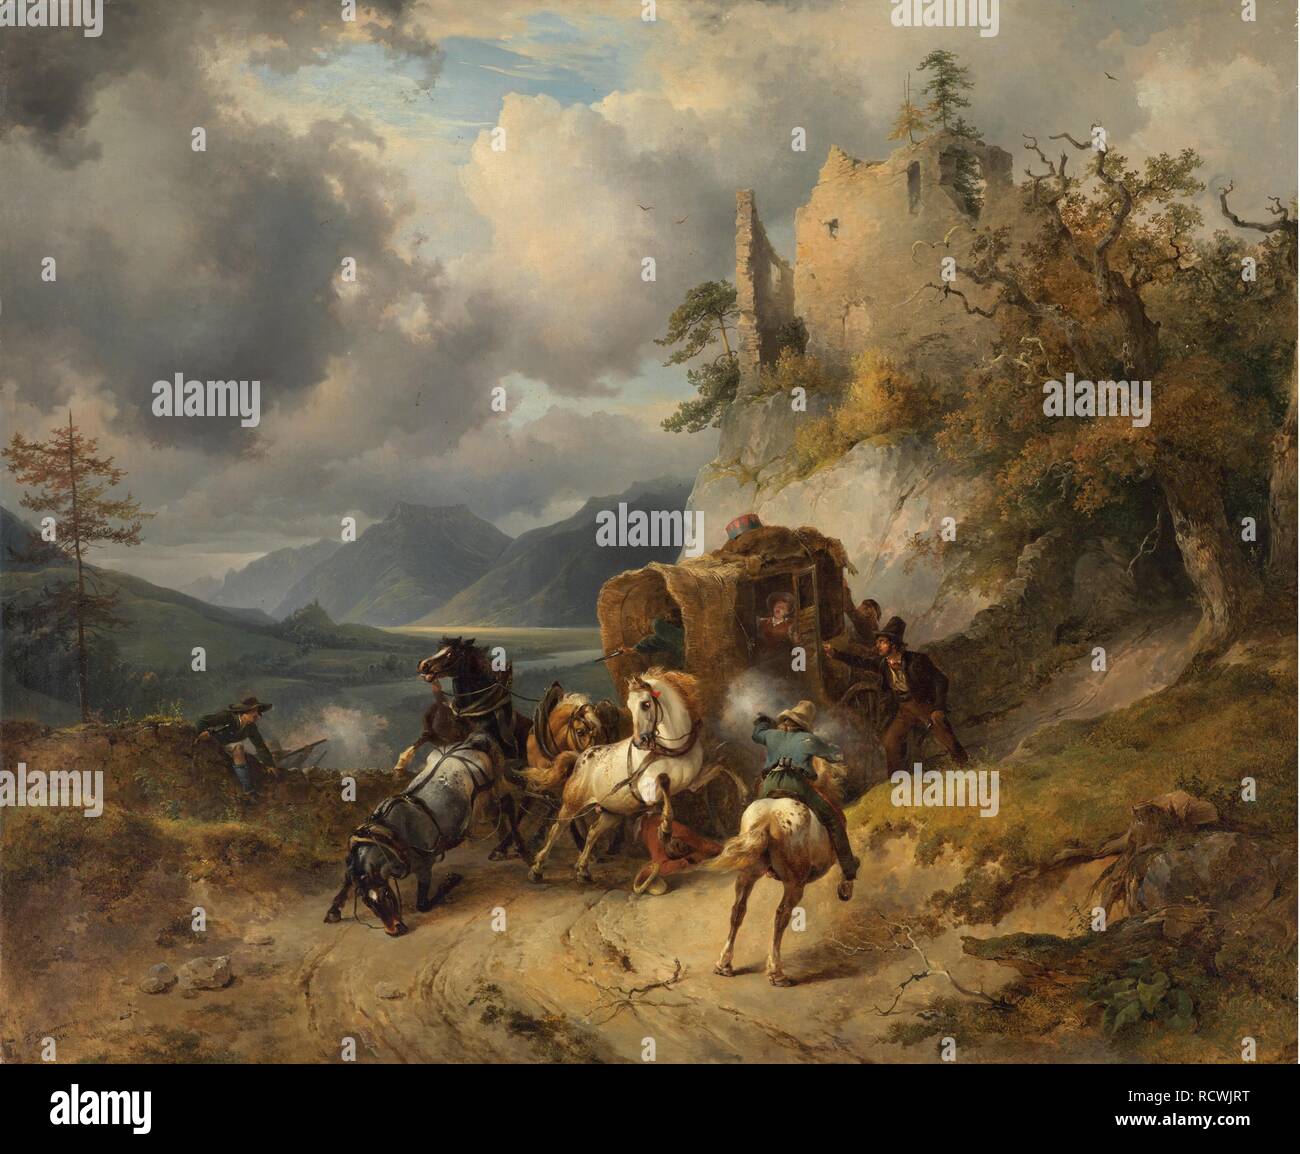 The Robbery. Museum: PRIVATE COLLECTION. Author: Gauermann, Friedrich August Matthias. Stock Photo